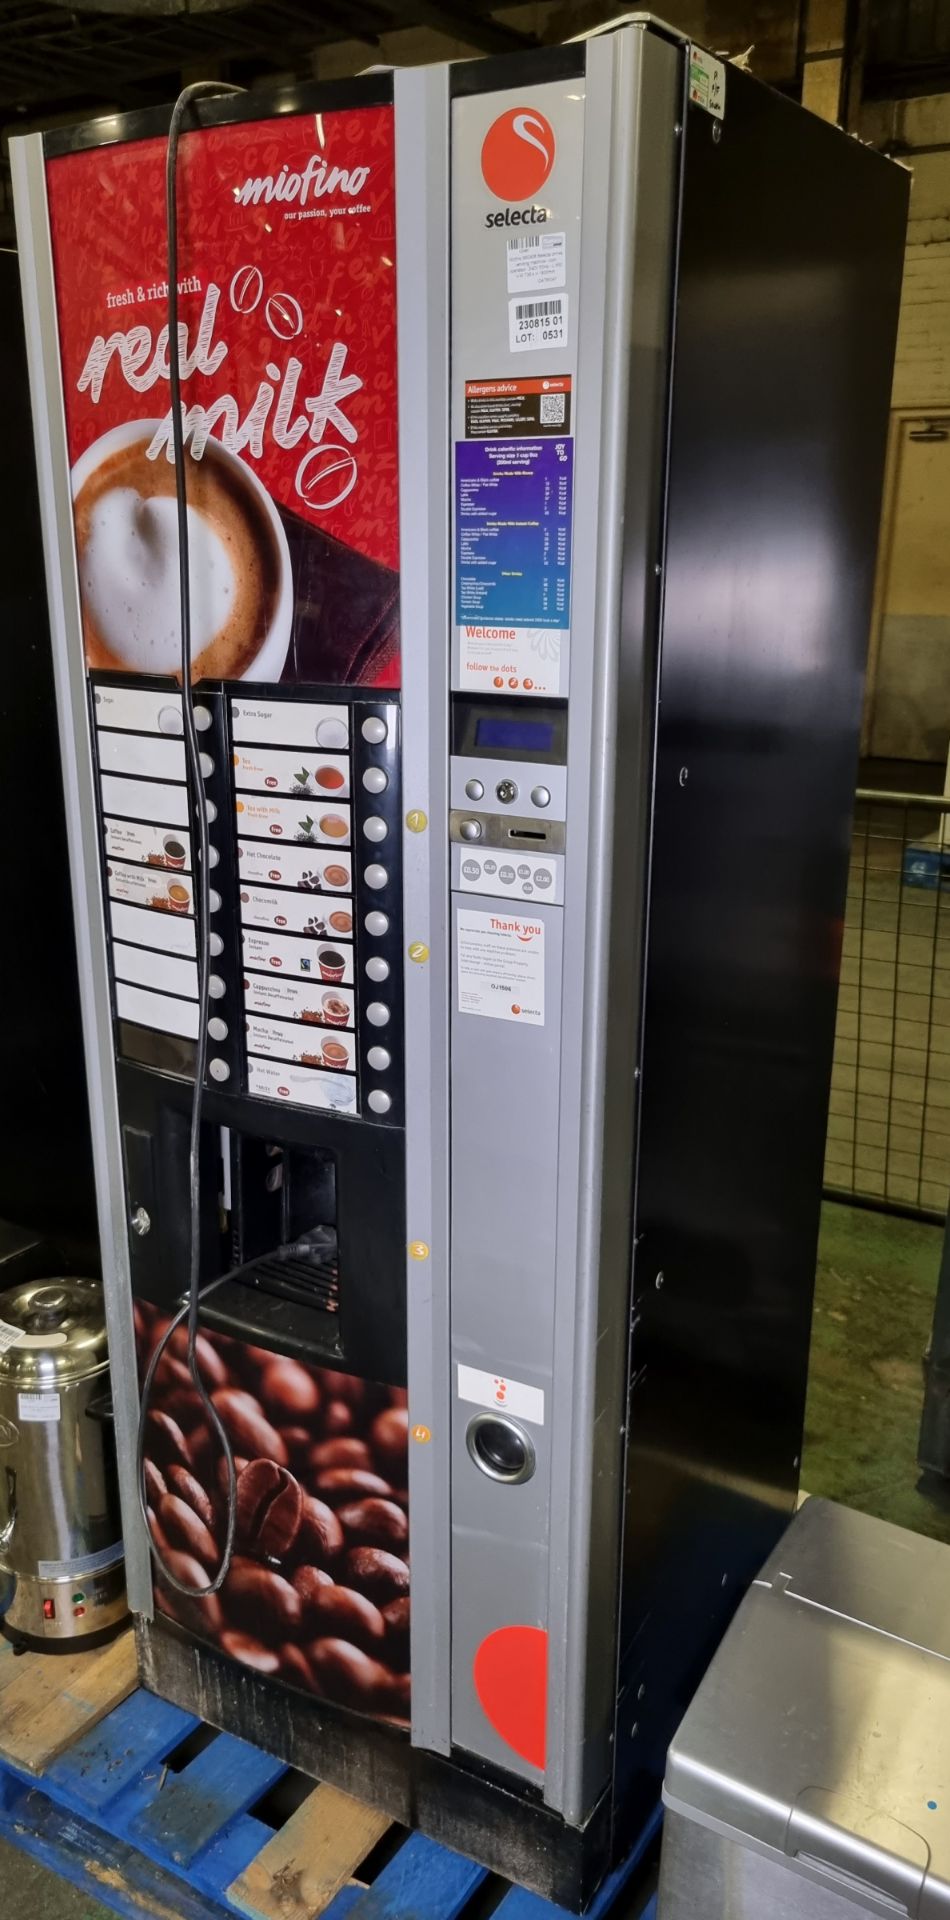 Miofino 960406 Selecta drinks vending machine - coin operated - 240V 50Hz - L 650 x W 730 x H 1830mm - Image 3 of 5